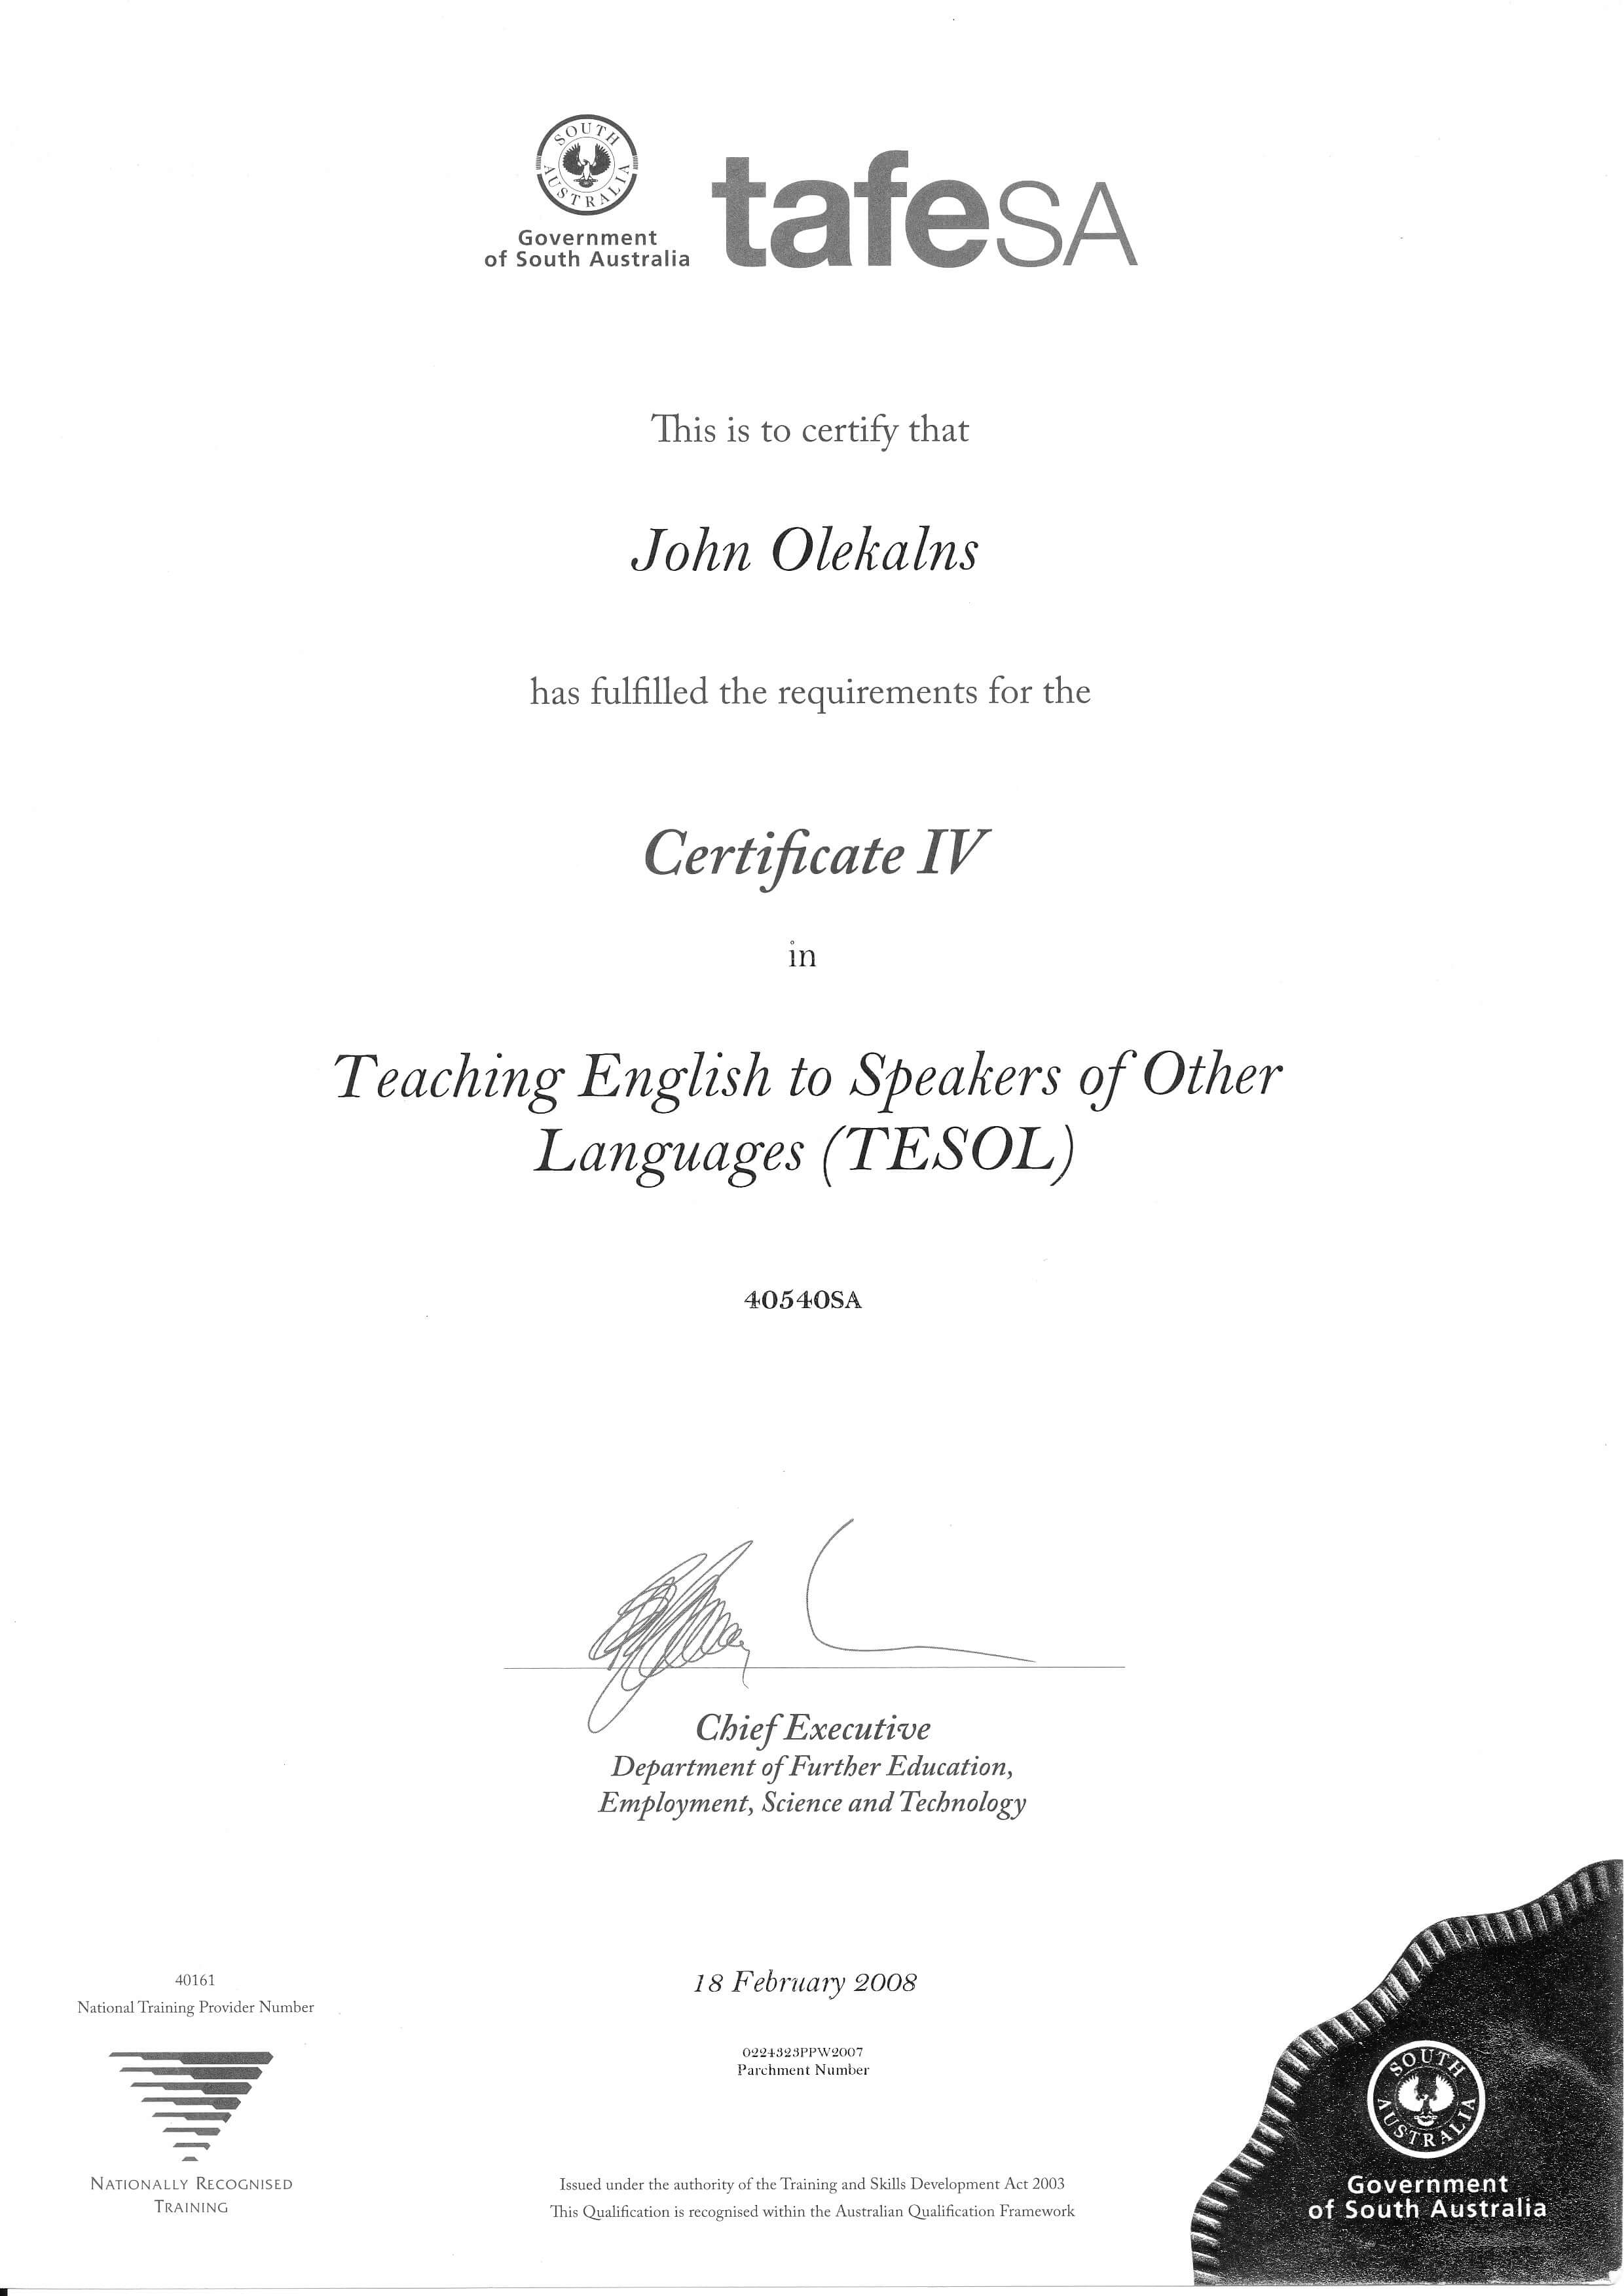 Certificate IV in Teaching English to Speakers of Other Languages (TESOL)